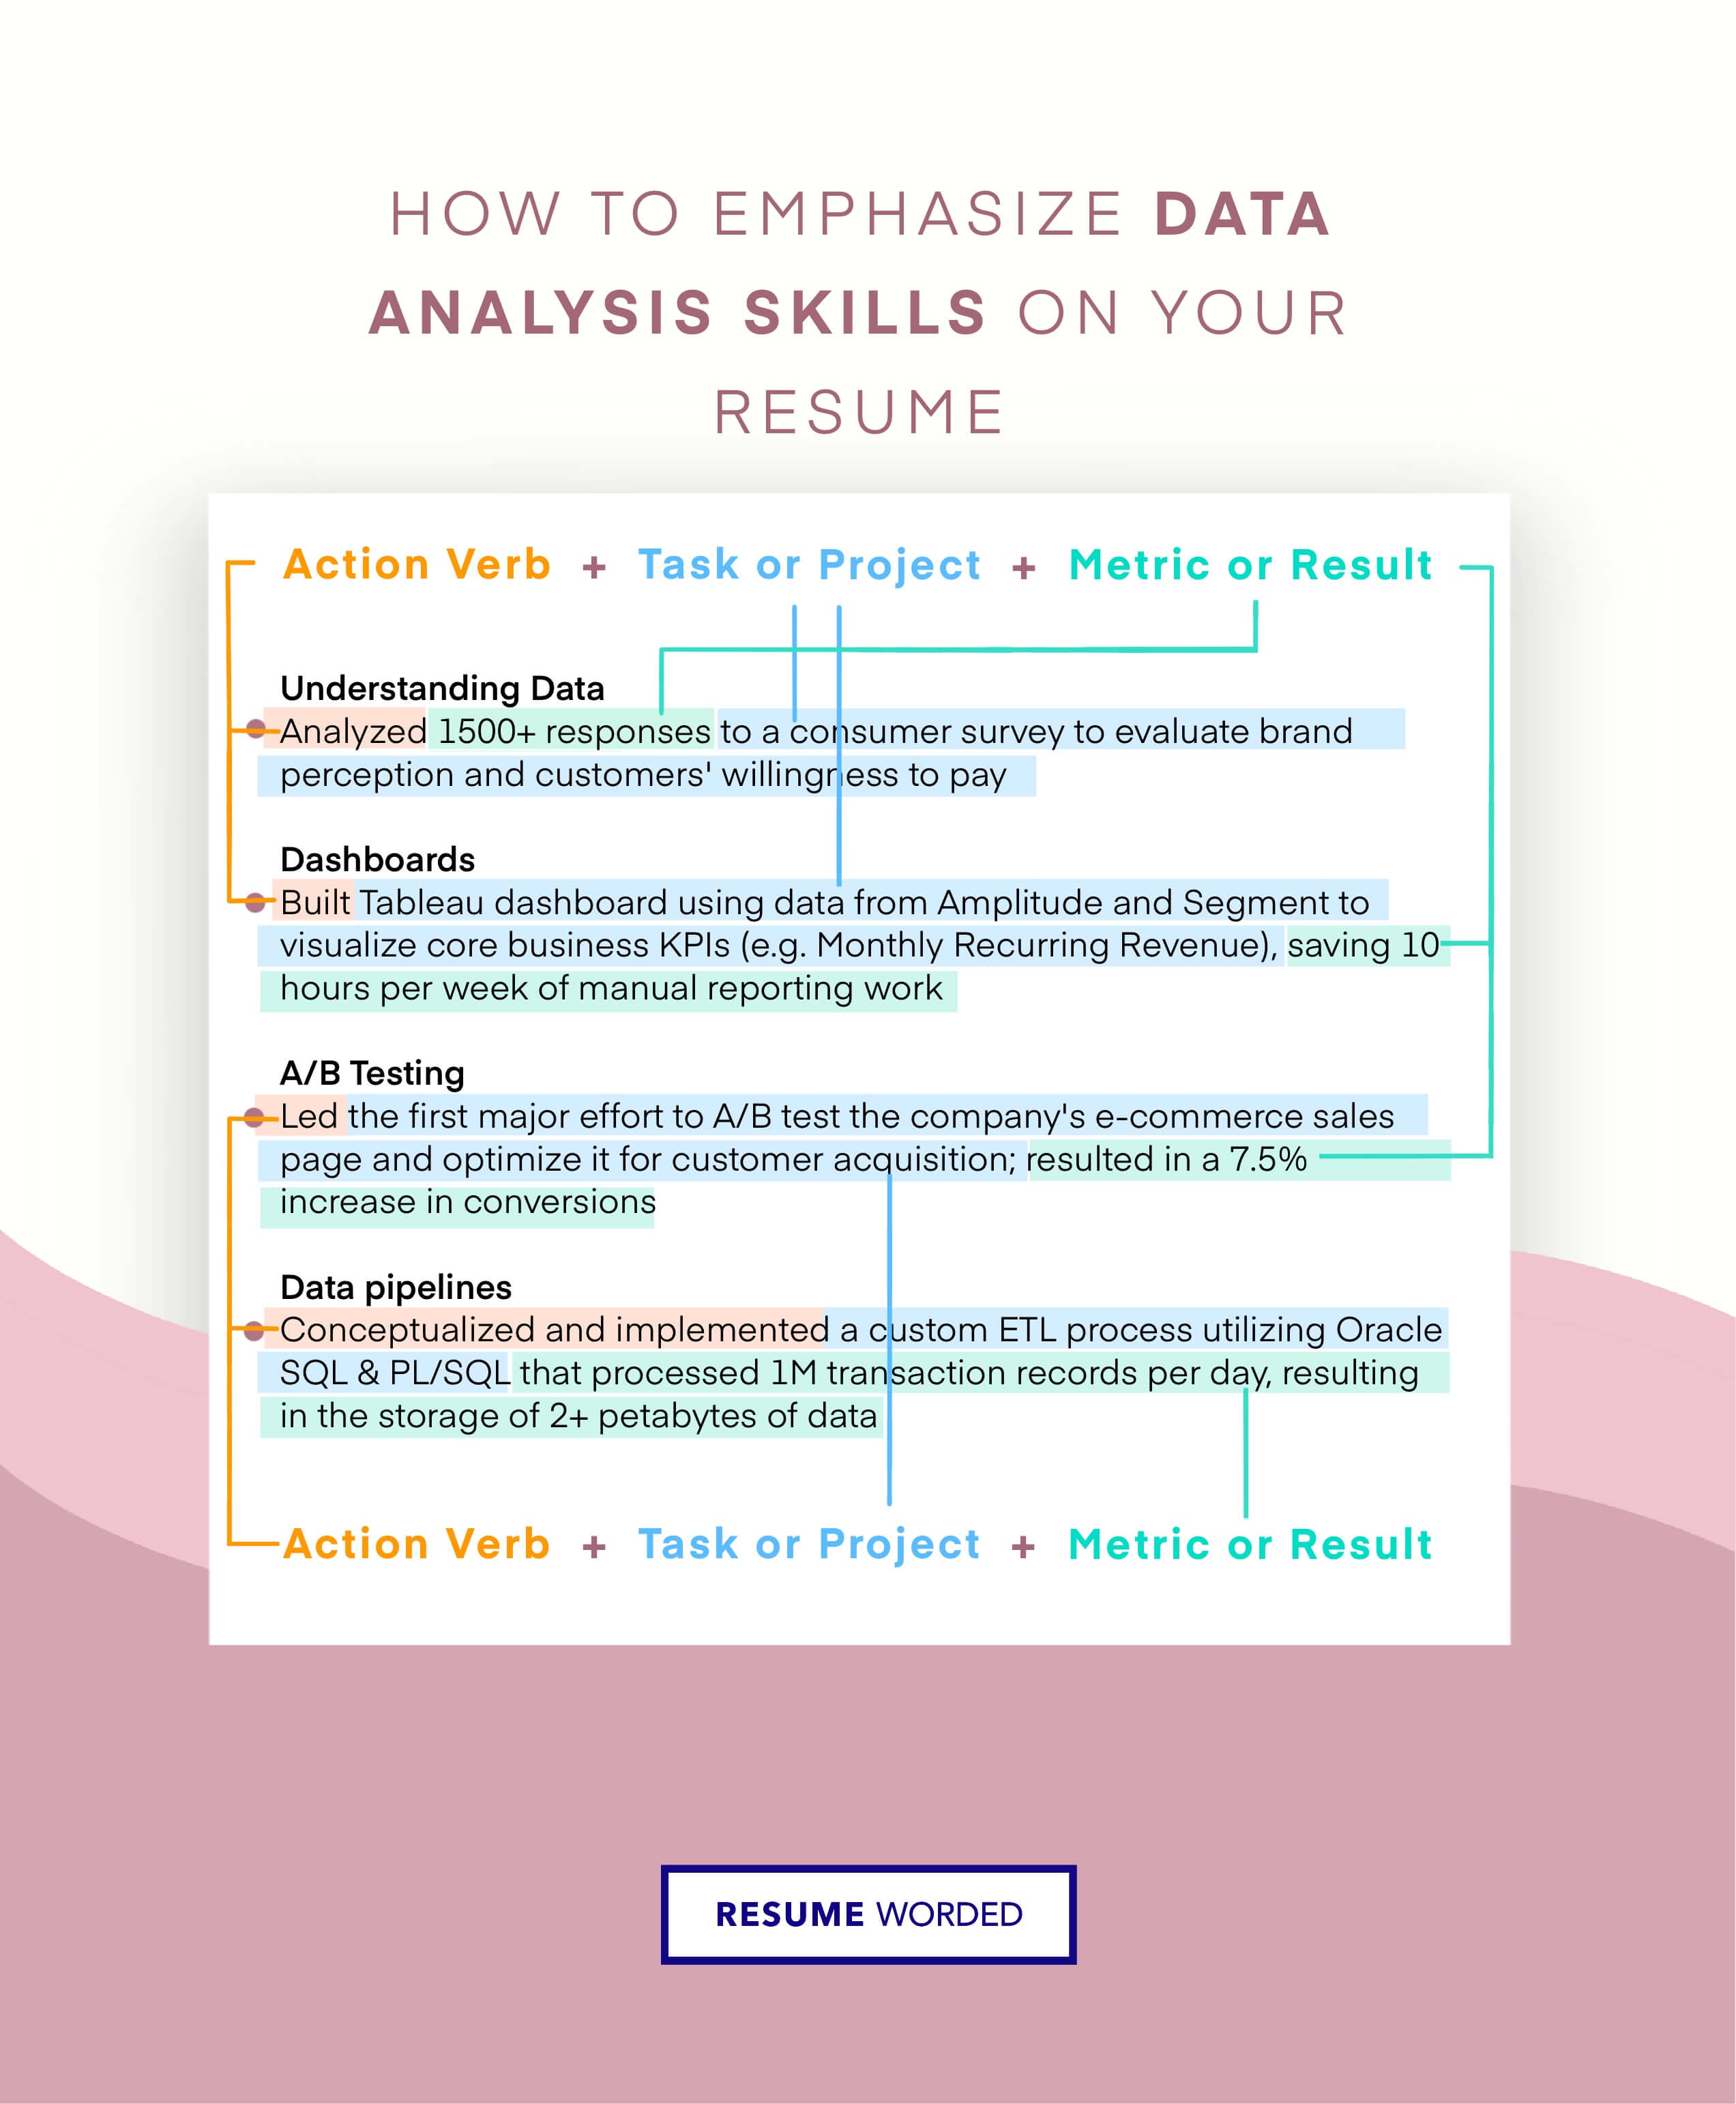 Demonstrate your ability to make data-driven decisions on your resume. - Product Marketing Manager Resume